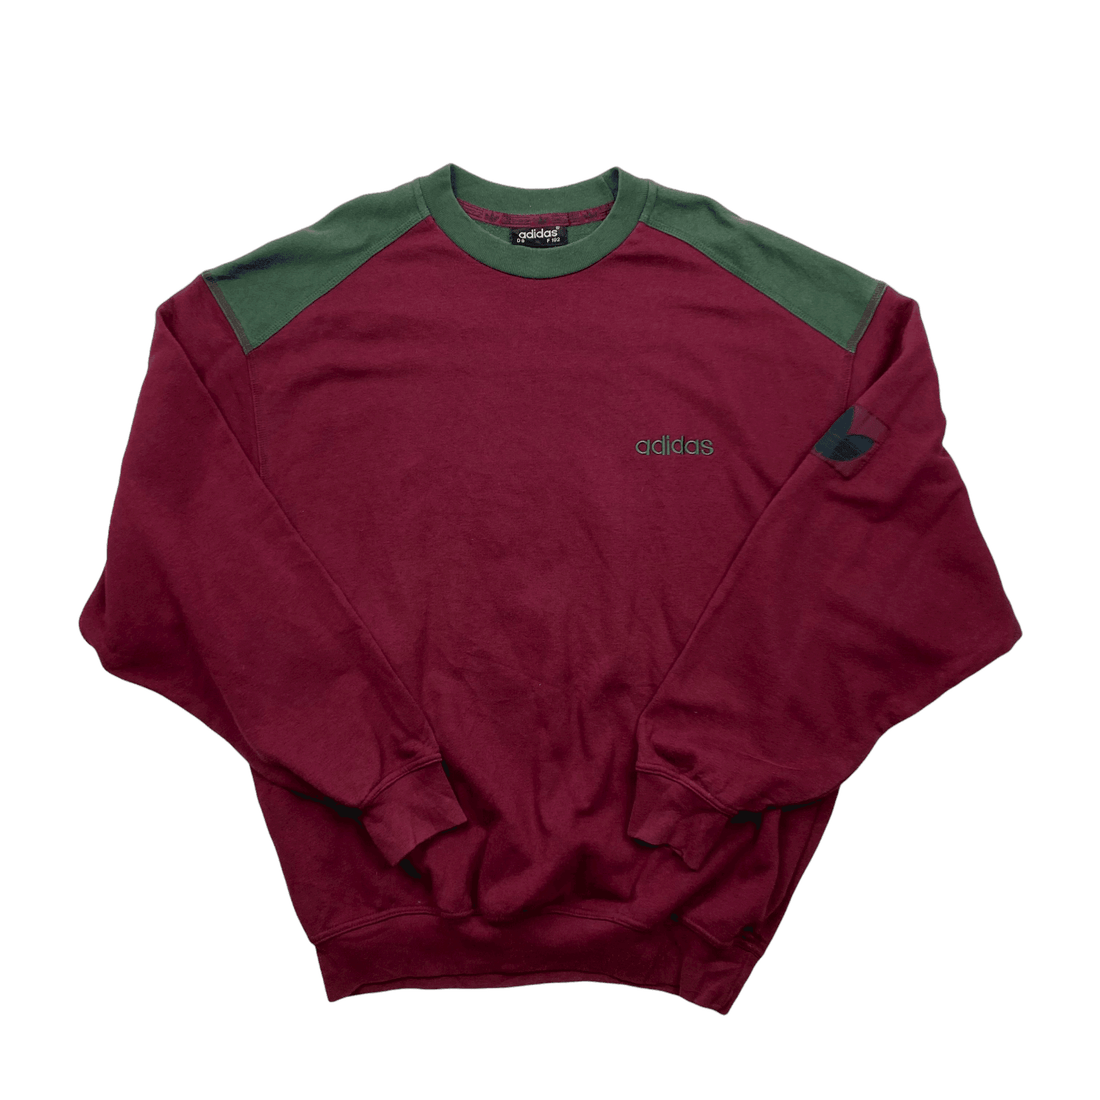 Vintage 90s Burgundy + Green Adidas Spell-Out Sweatshirt - Extra Large - The Streetwear Studio